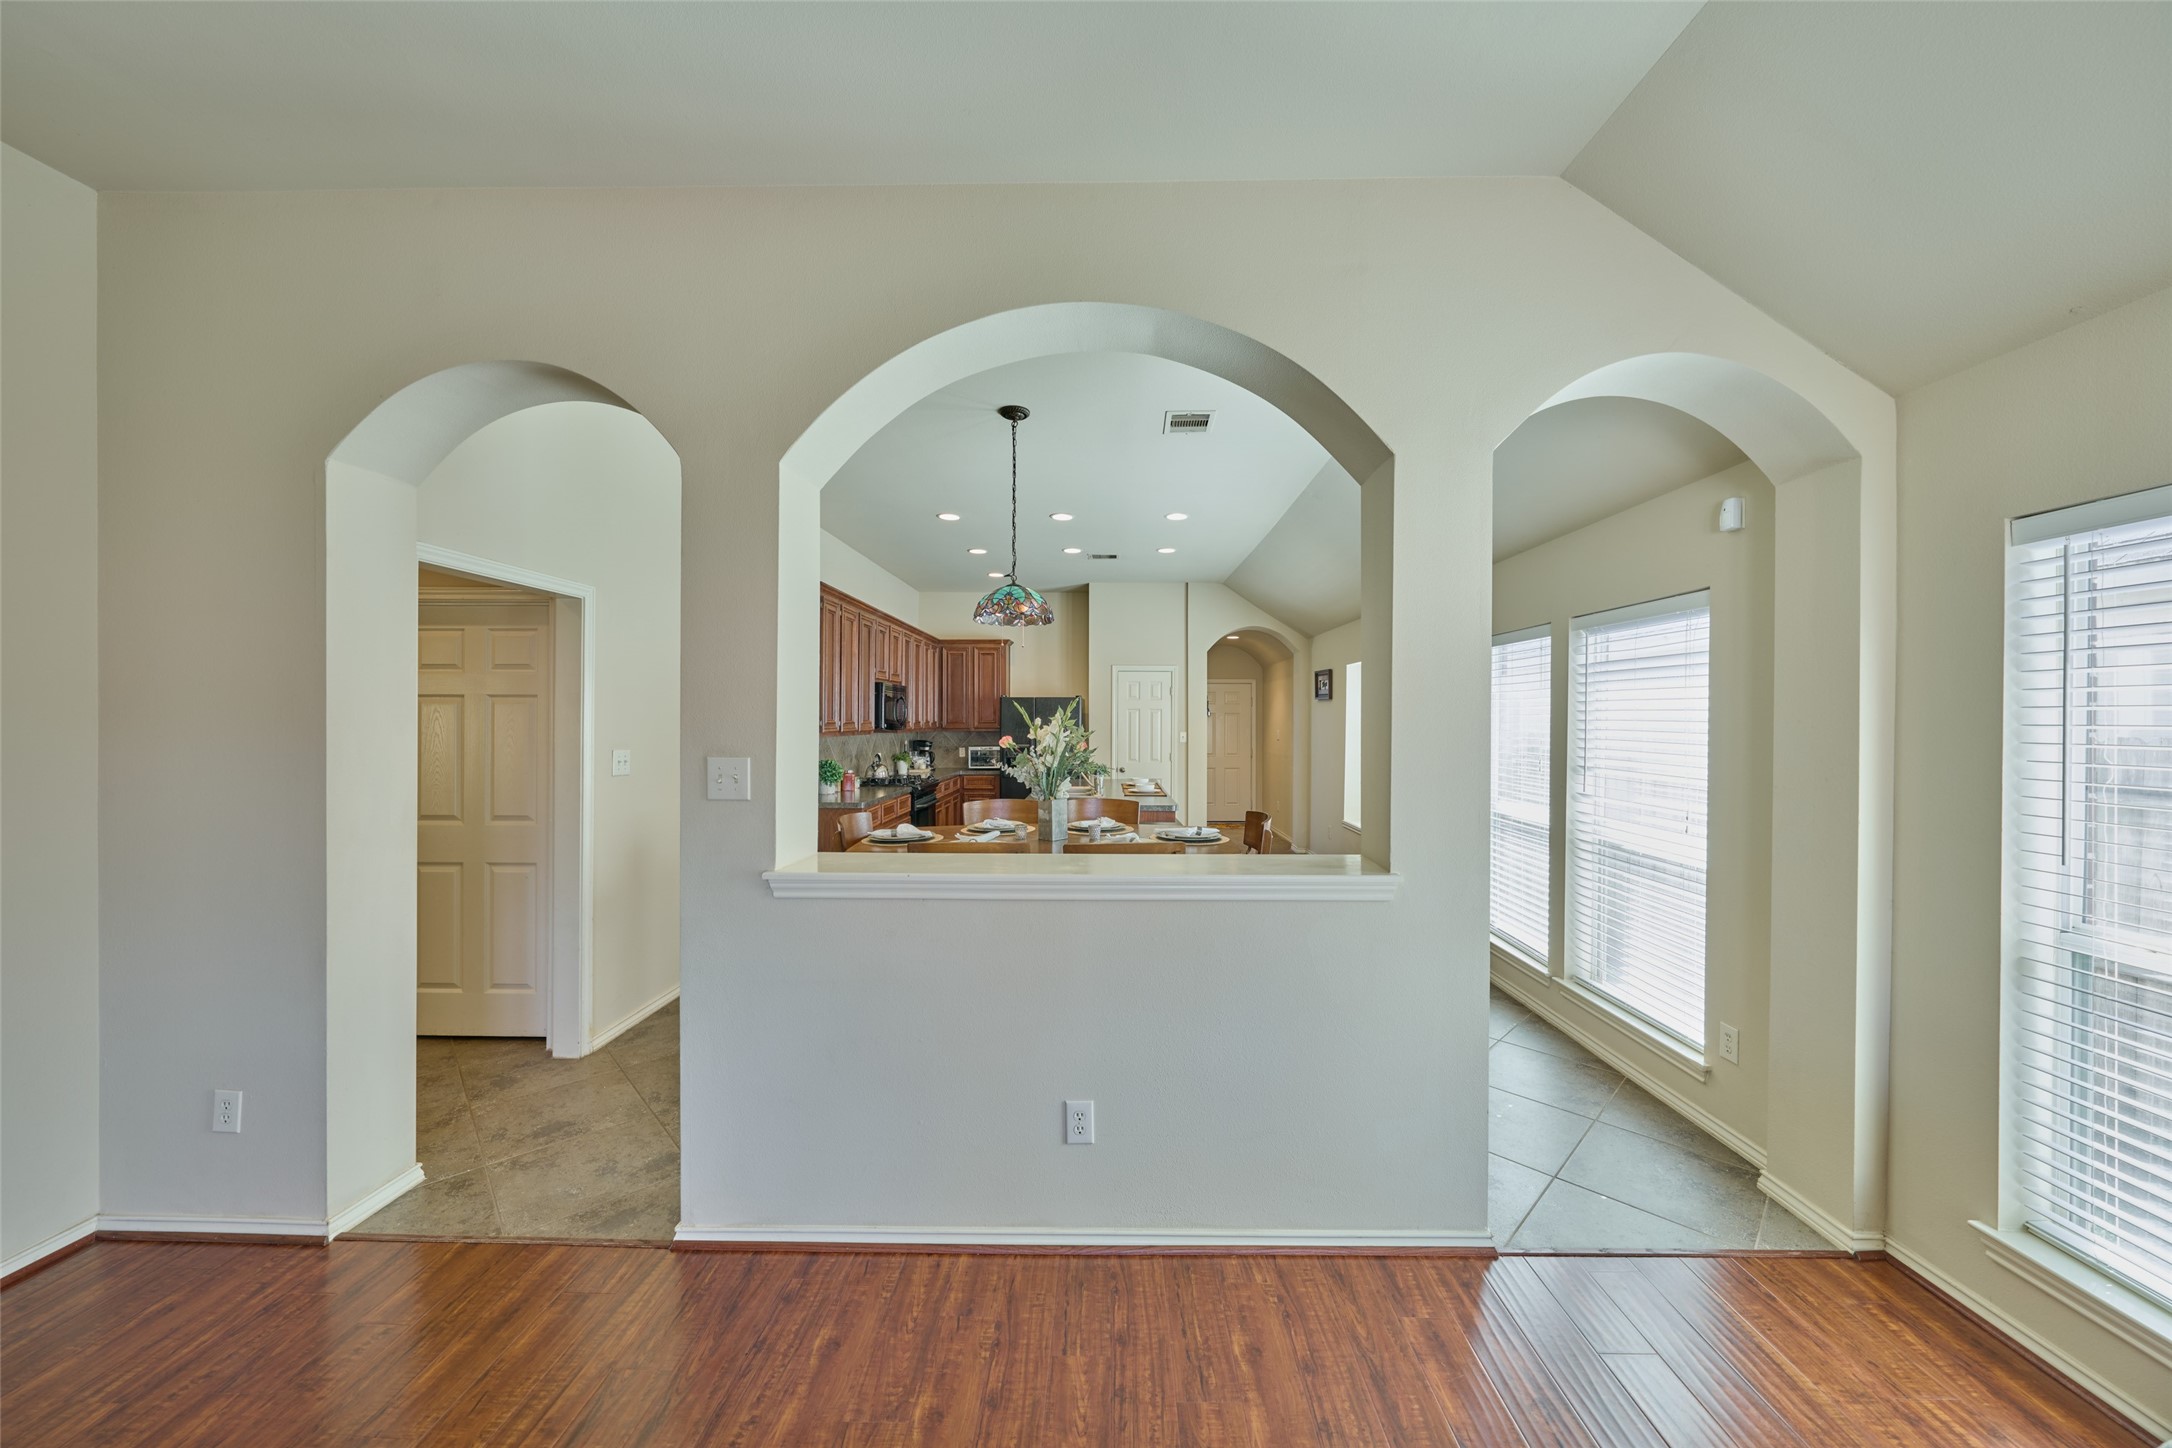 A view of the arches dividing the family and breakfast/kitchen. Just enough division to separate the space, but still open enough to see and hear what is happening from room to room.